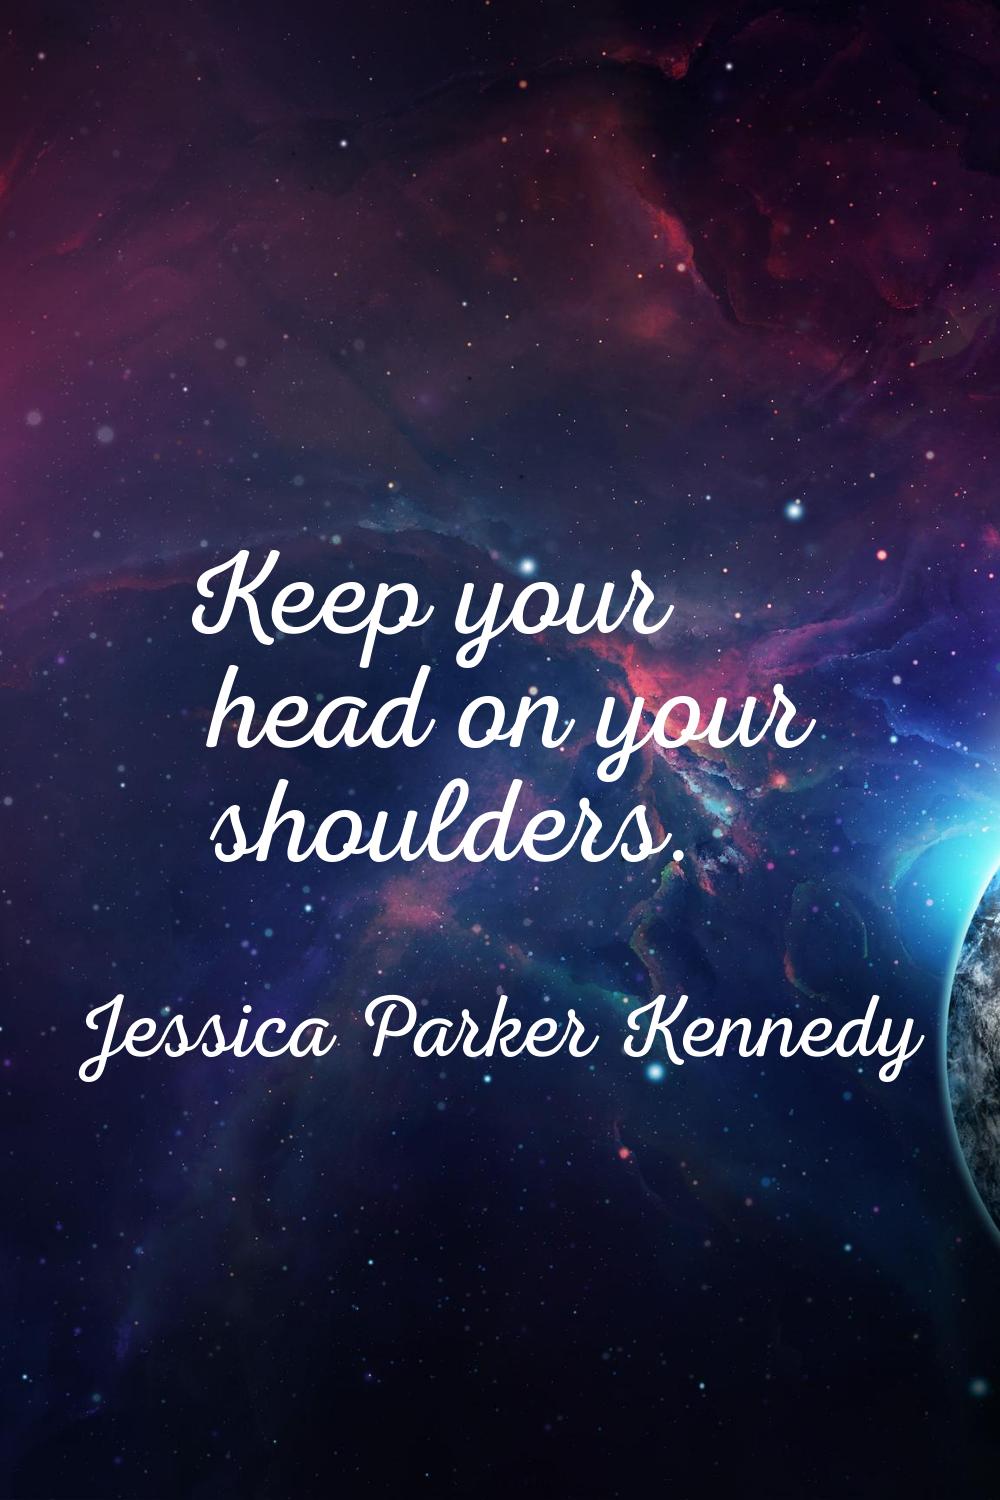 Keep your head on your shoulders.